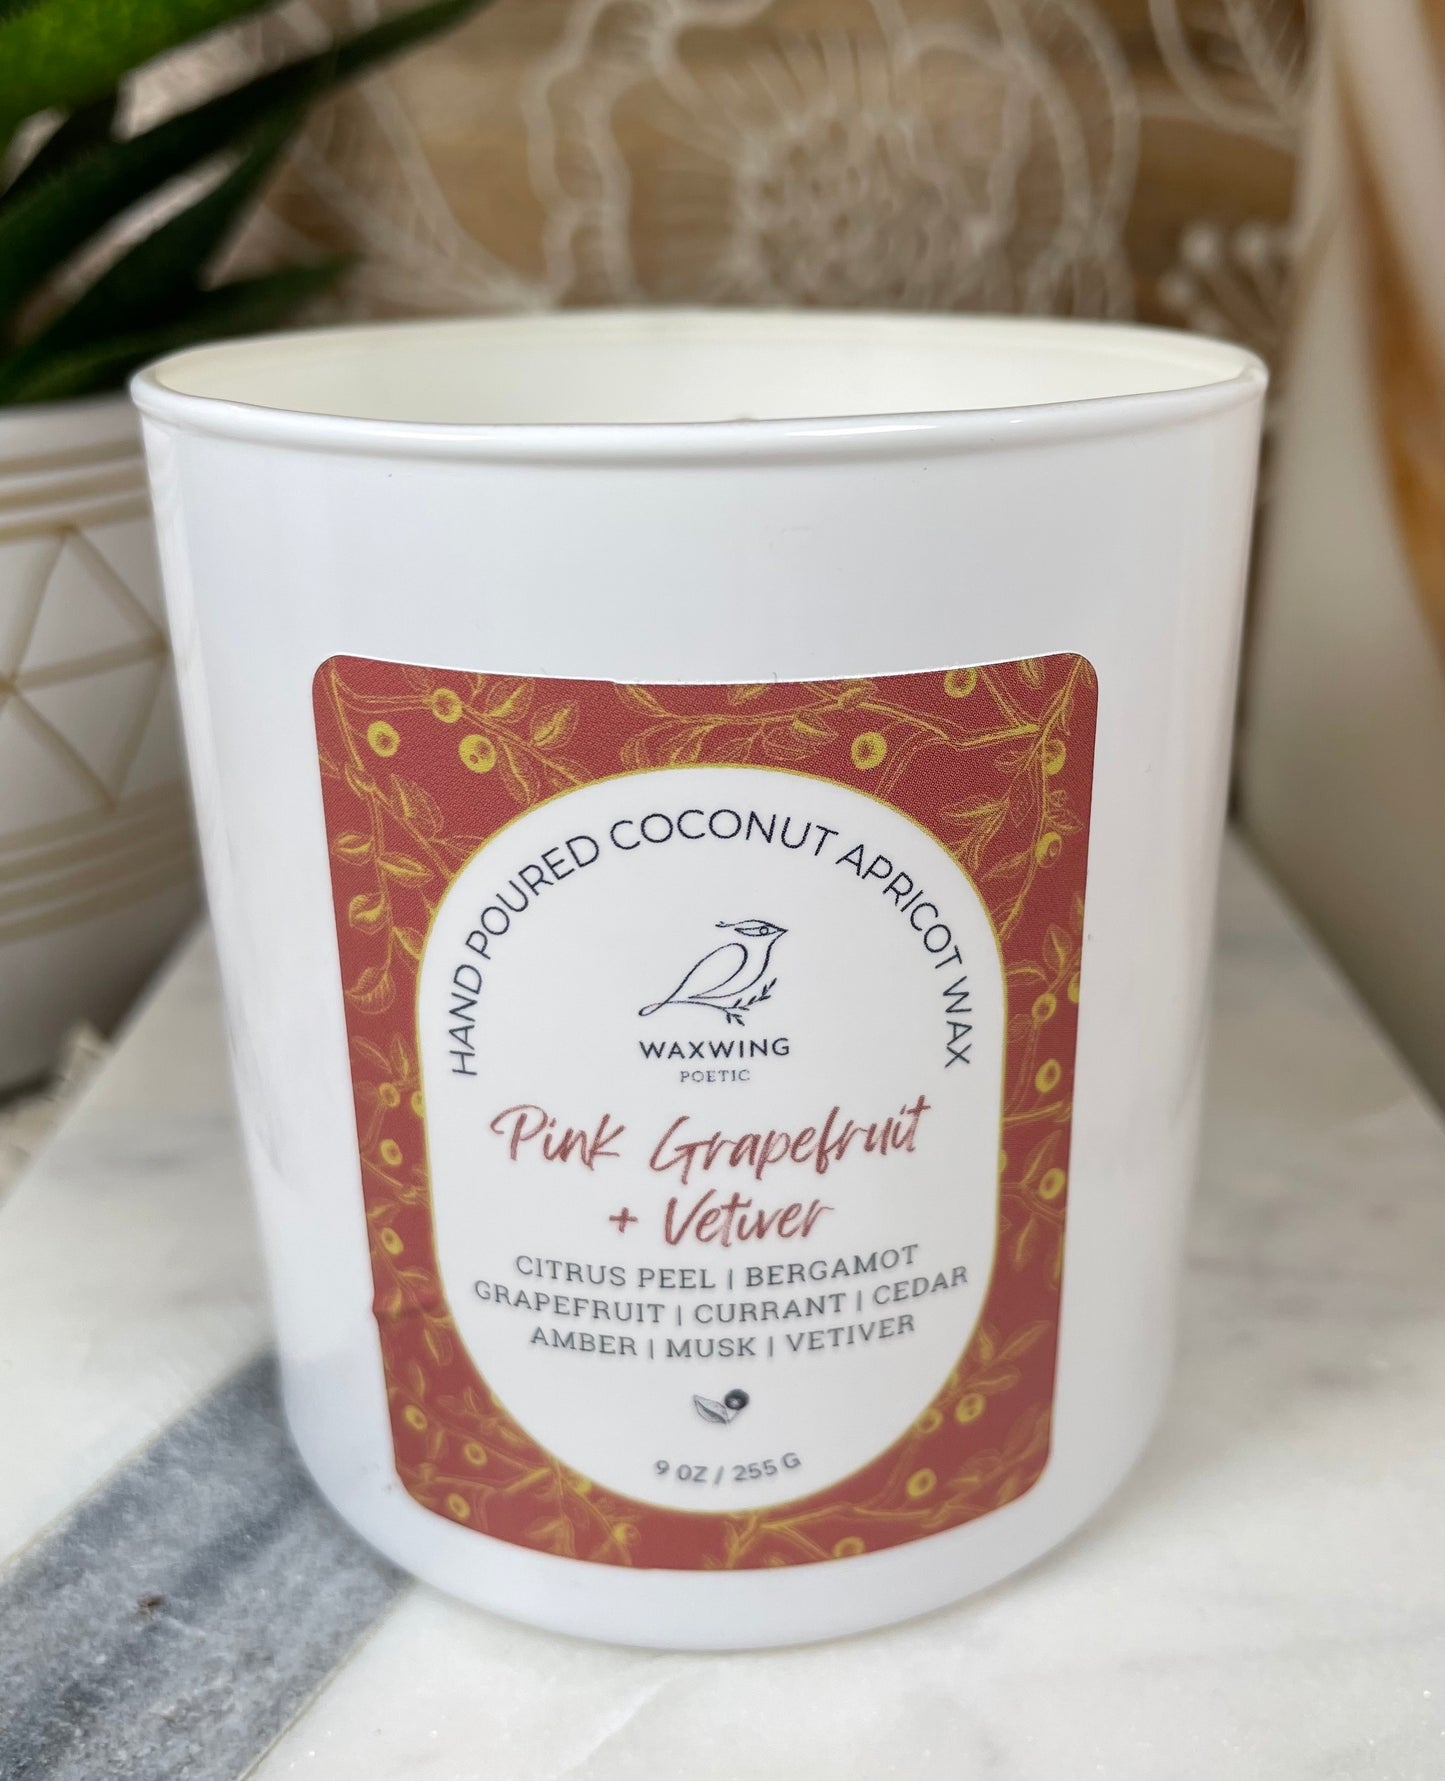 Pink Grapefruit + Vetiver | Coconut Apricot Wax Candle